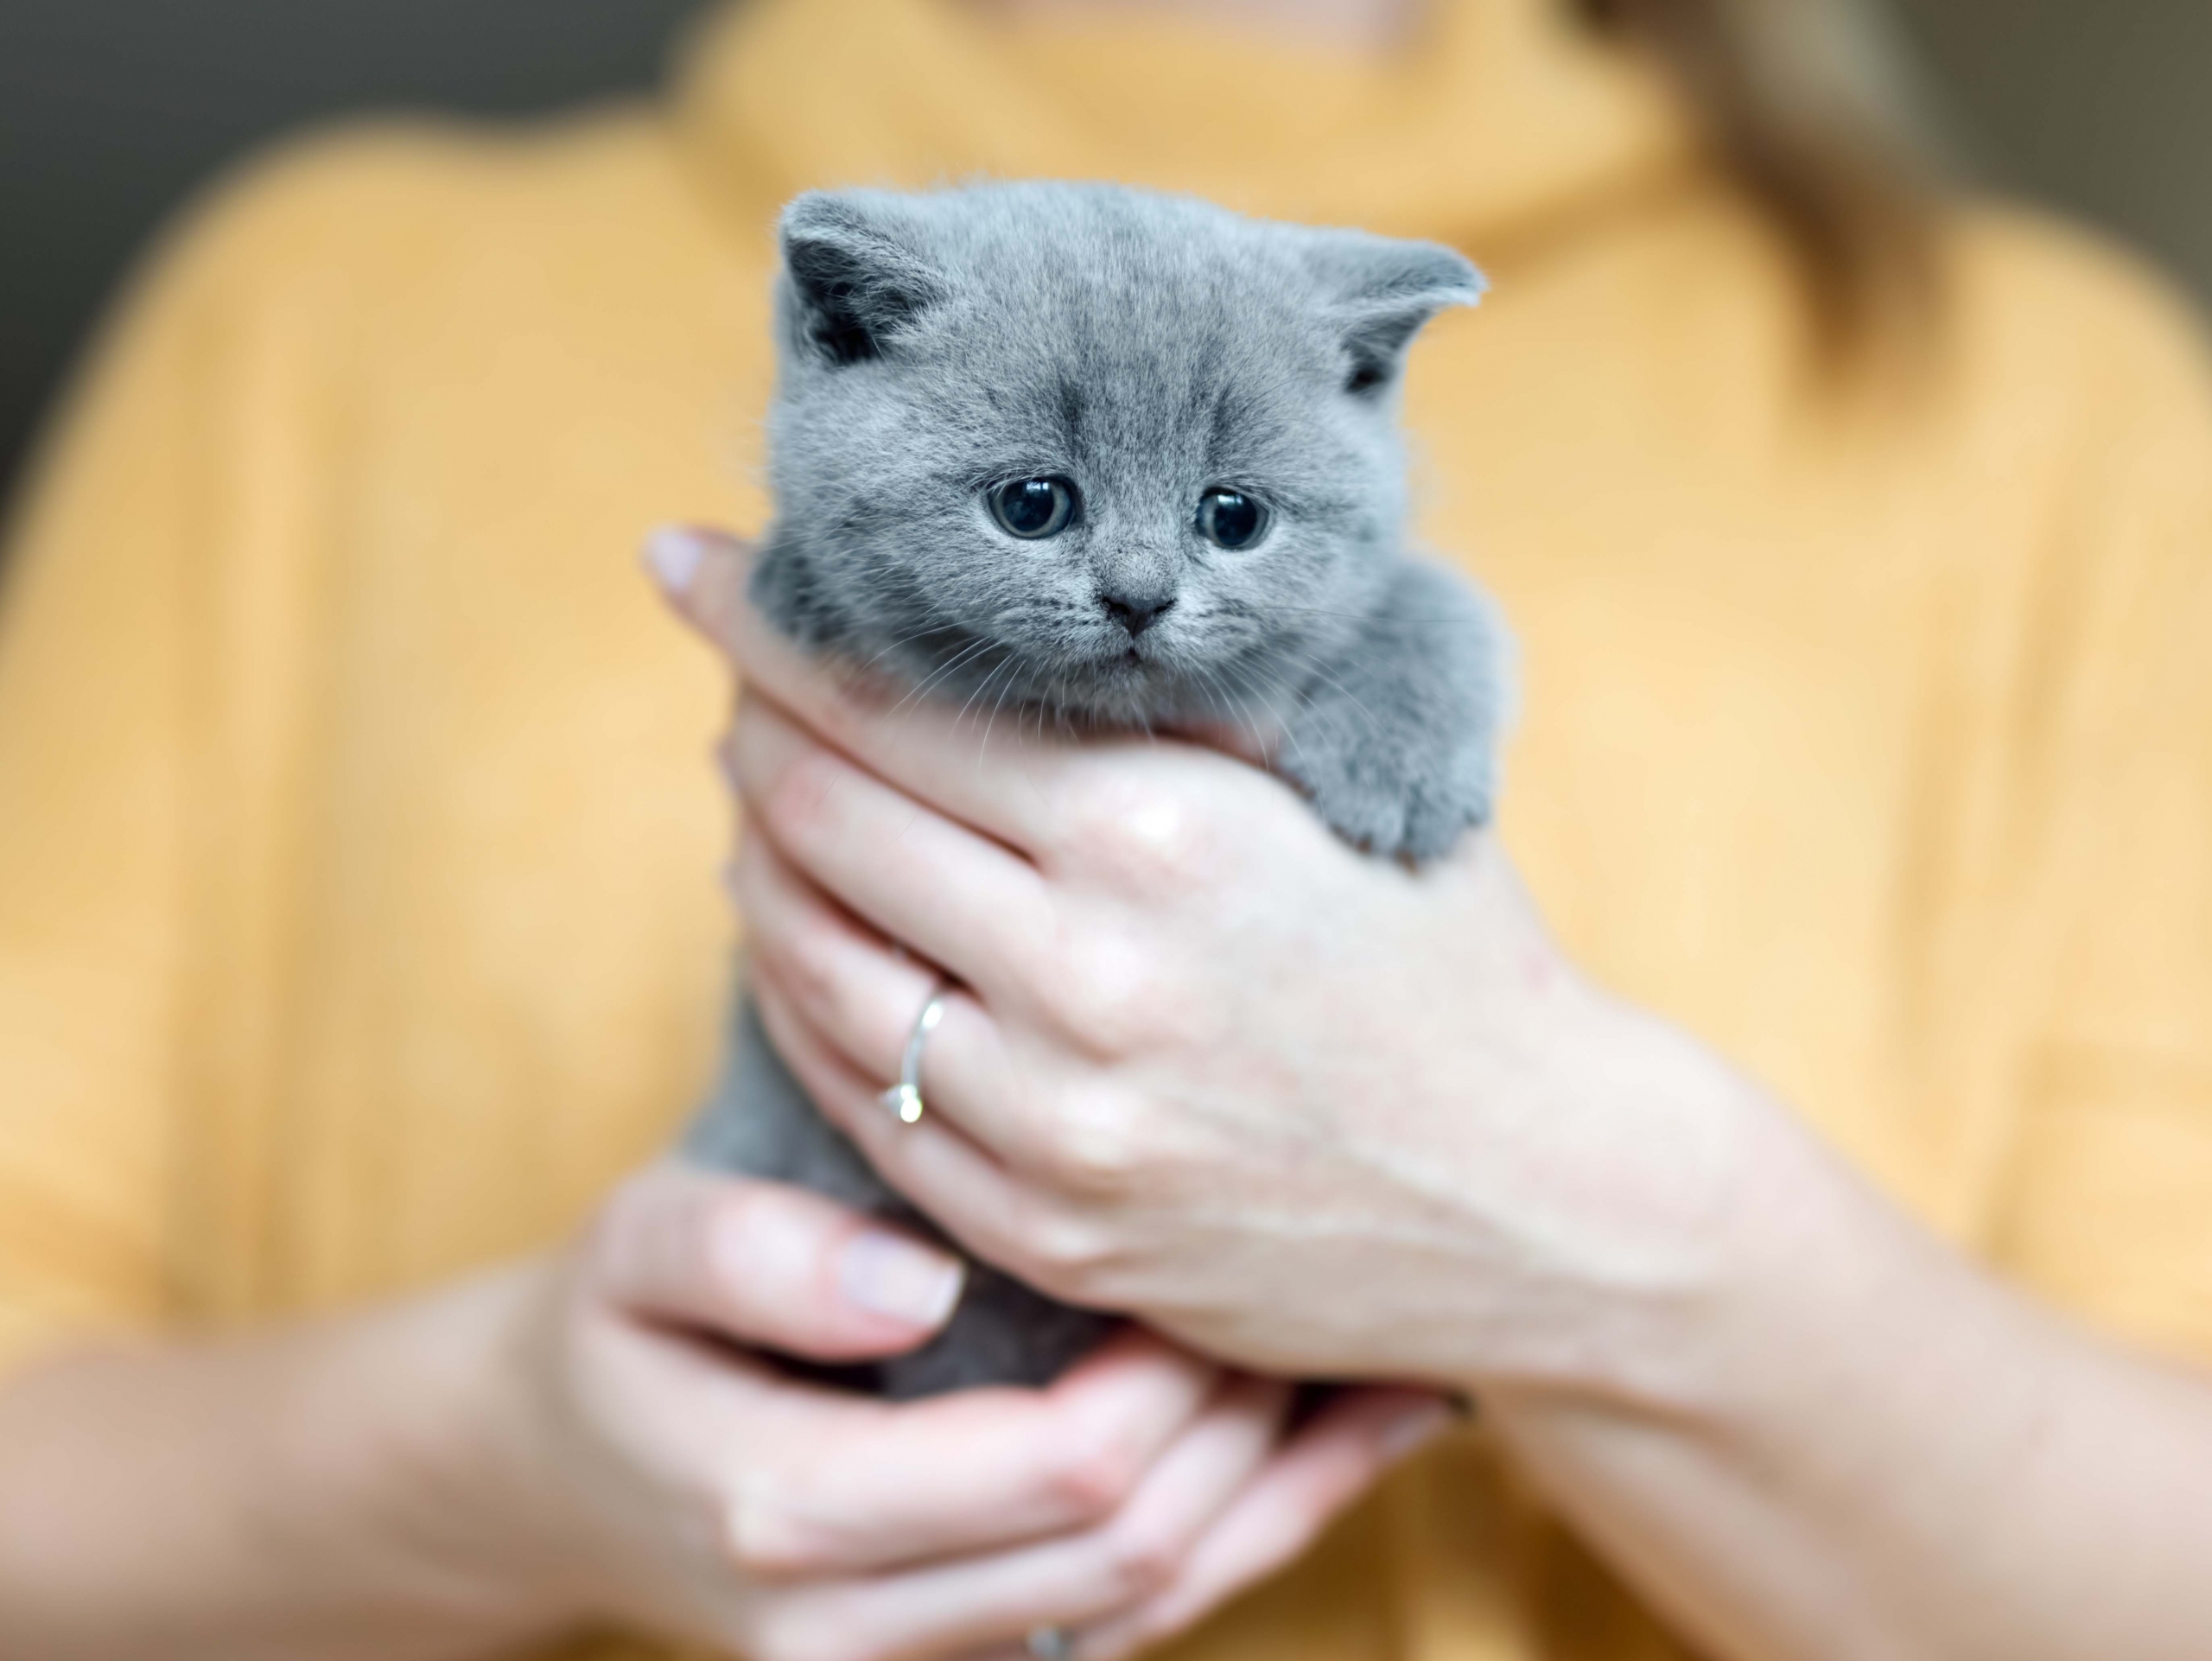 Grey adorable kitty held by a woman standing in a background. Furry love. British shorthair cat.